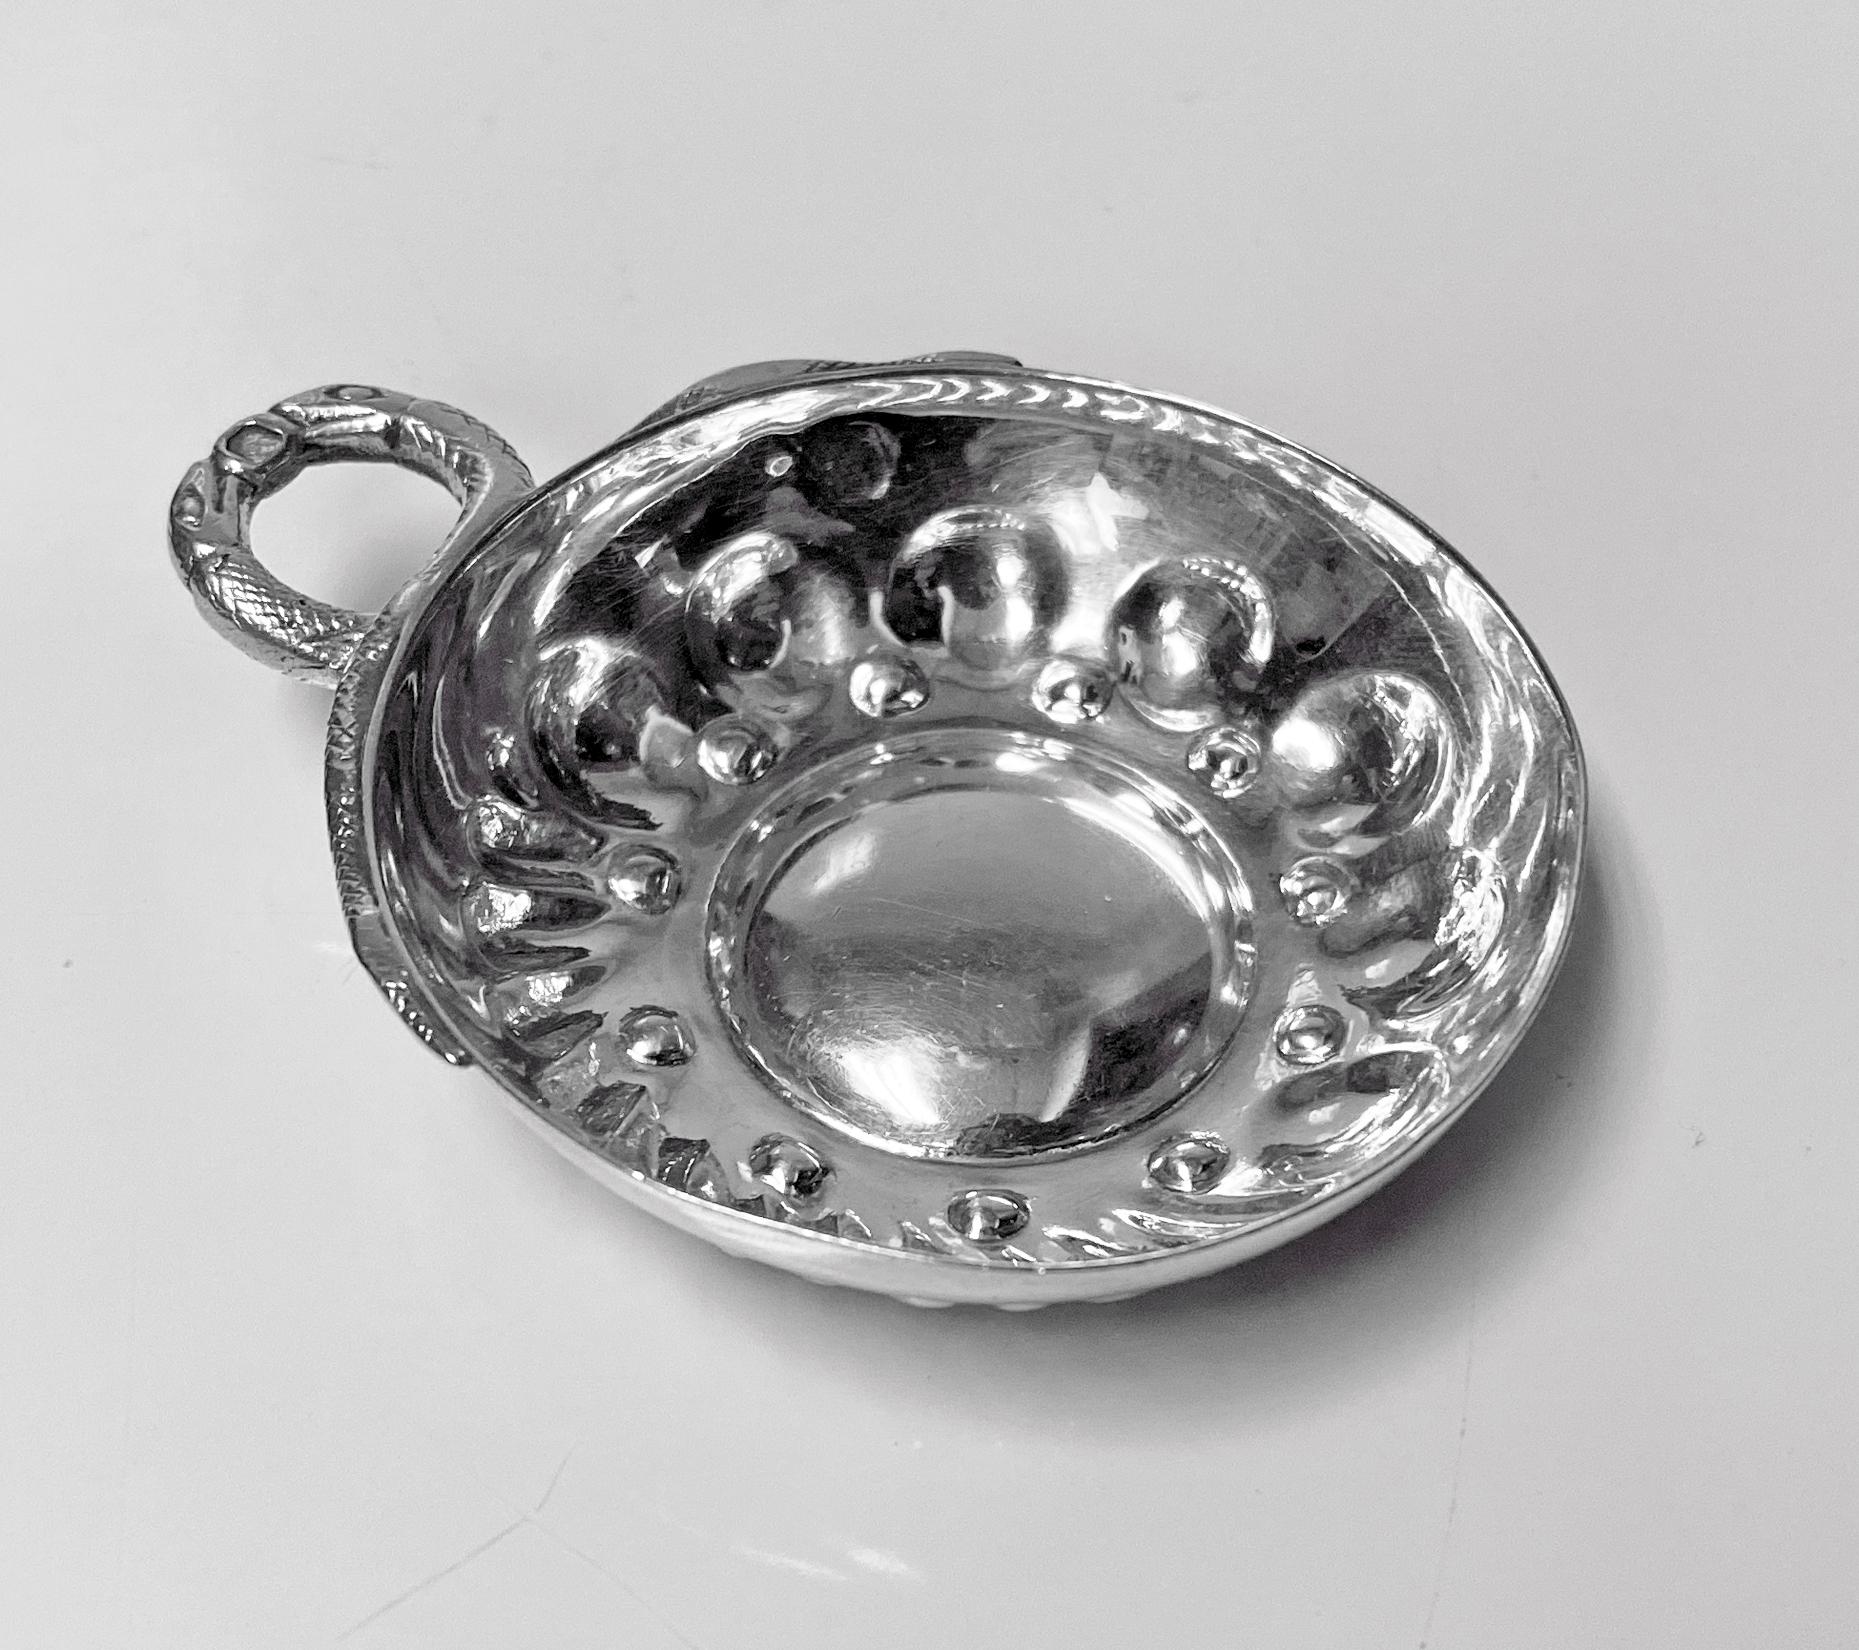 French 1st std .950 silver wine taster Tastevin, 20th century, maker's mark in lozenge. The Tastevin of usual form, the lower part of bowl with a surround of concave and swirl lobate style decoration, double entwined serpent handle, also marked with